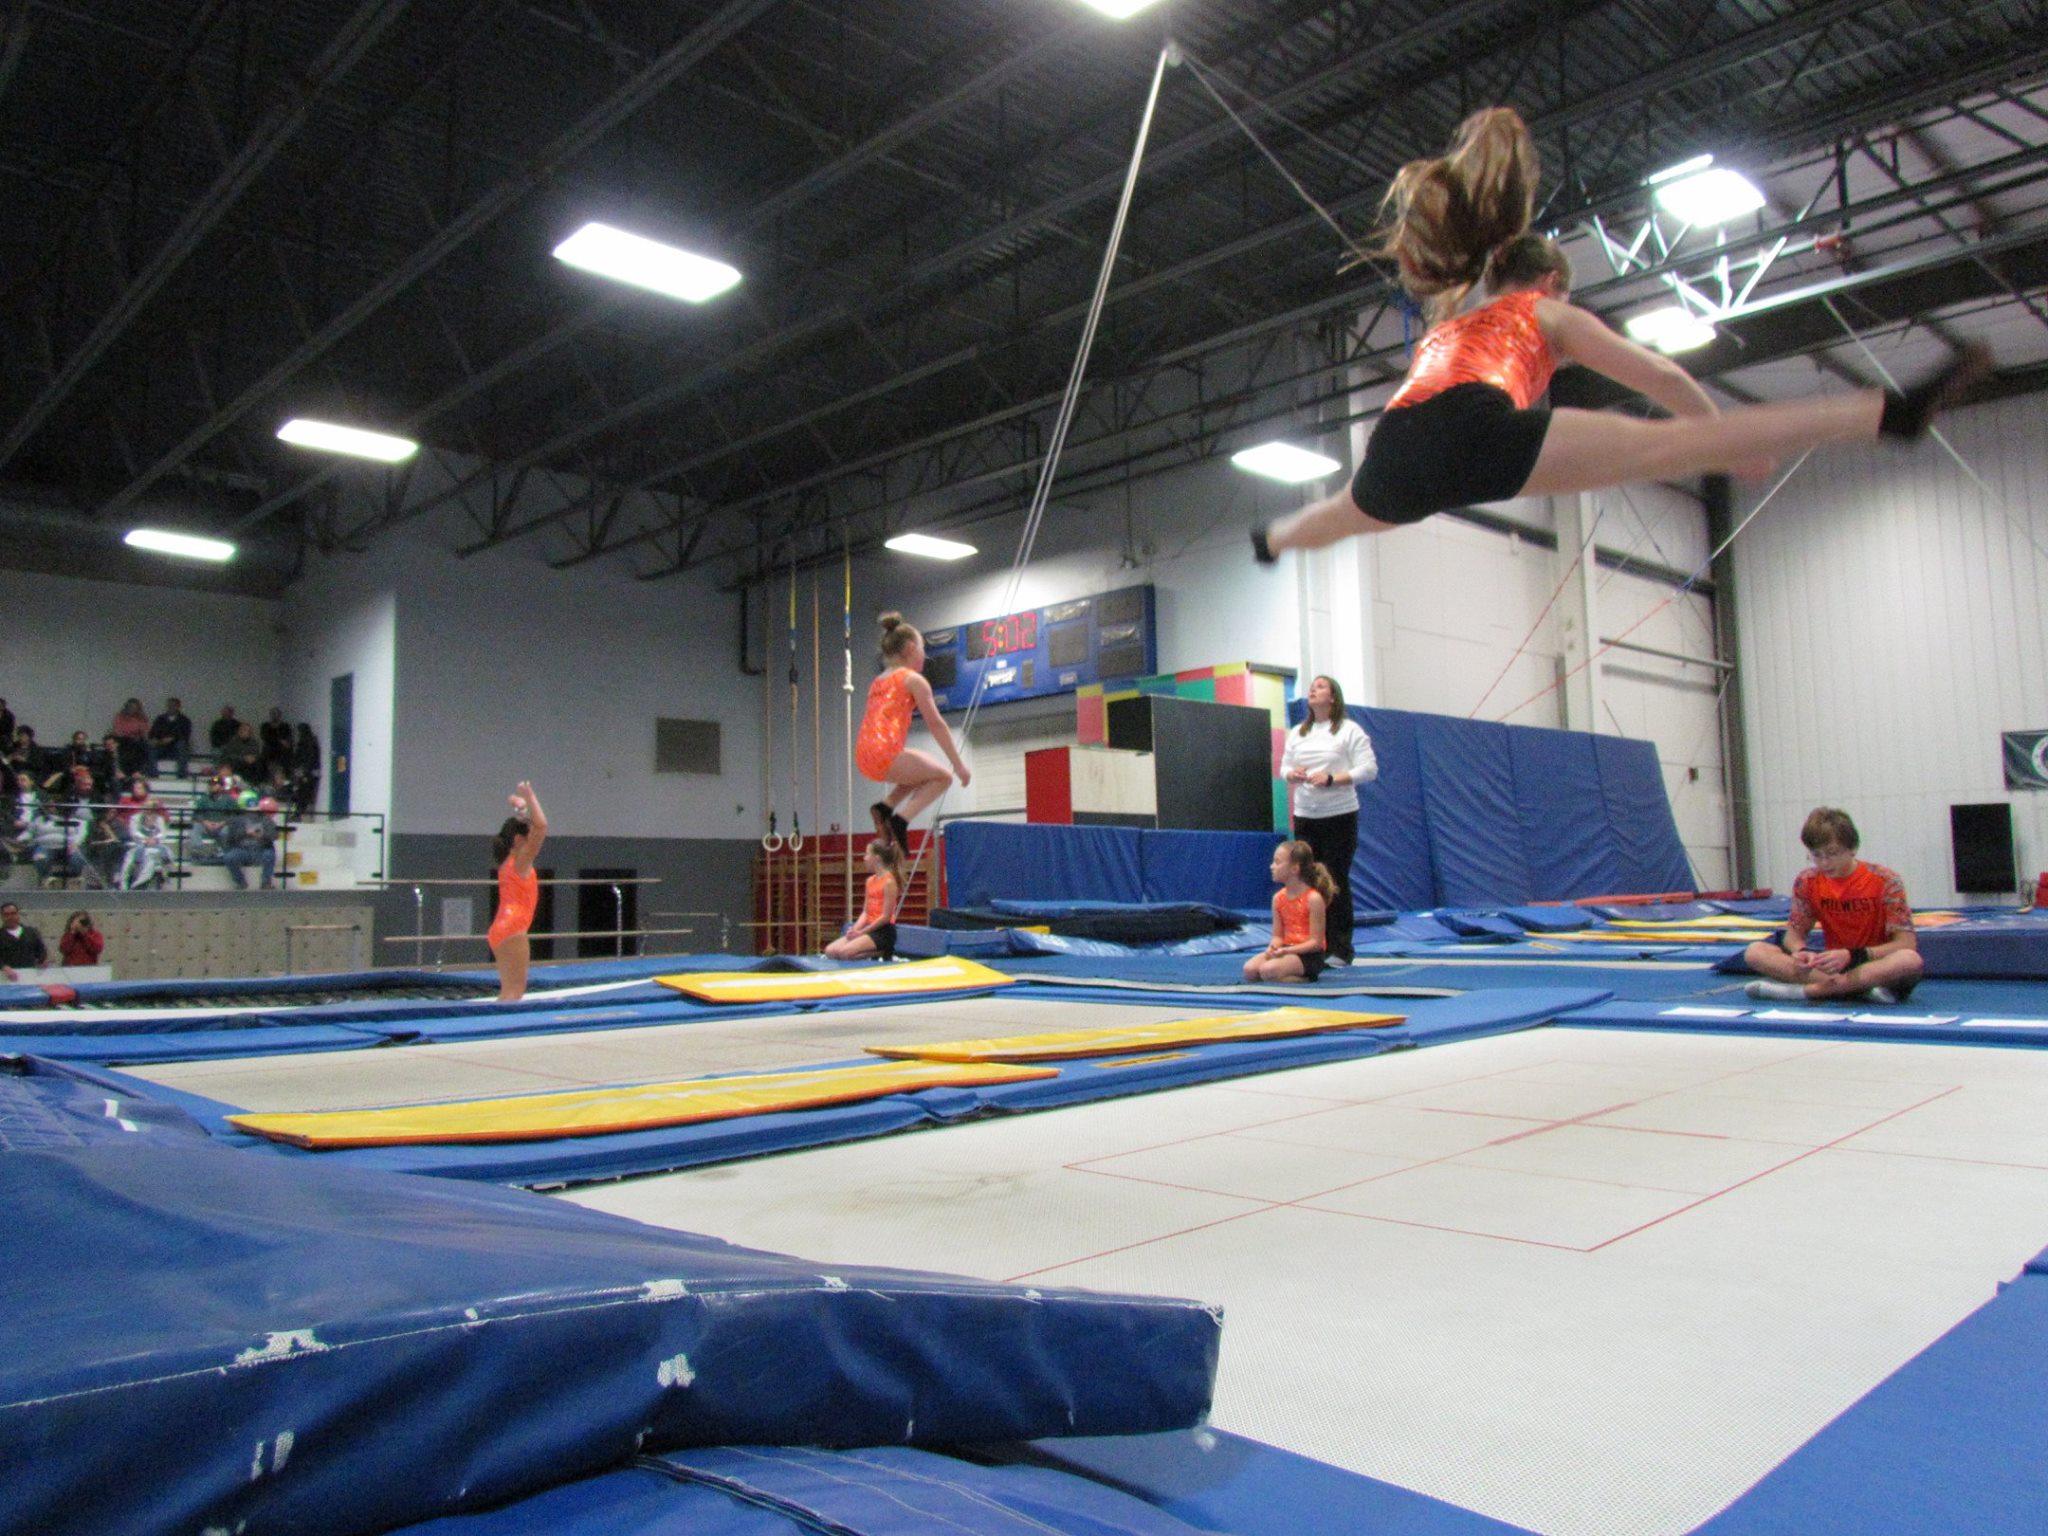 Girls jumping on a gymnastic trampoline 